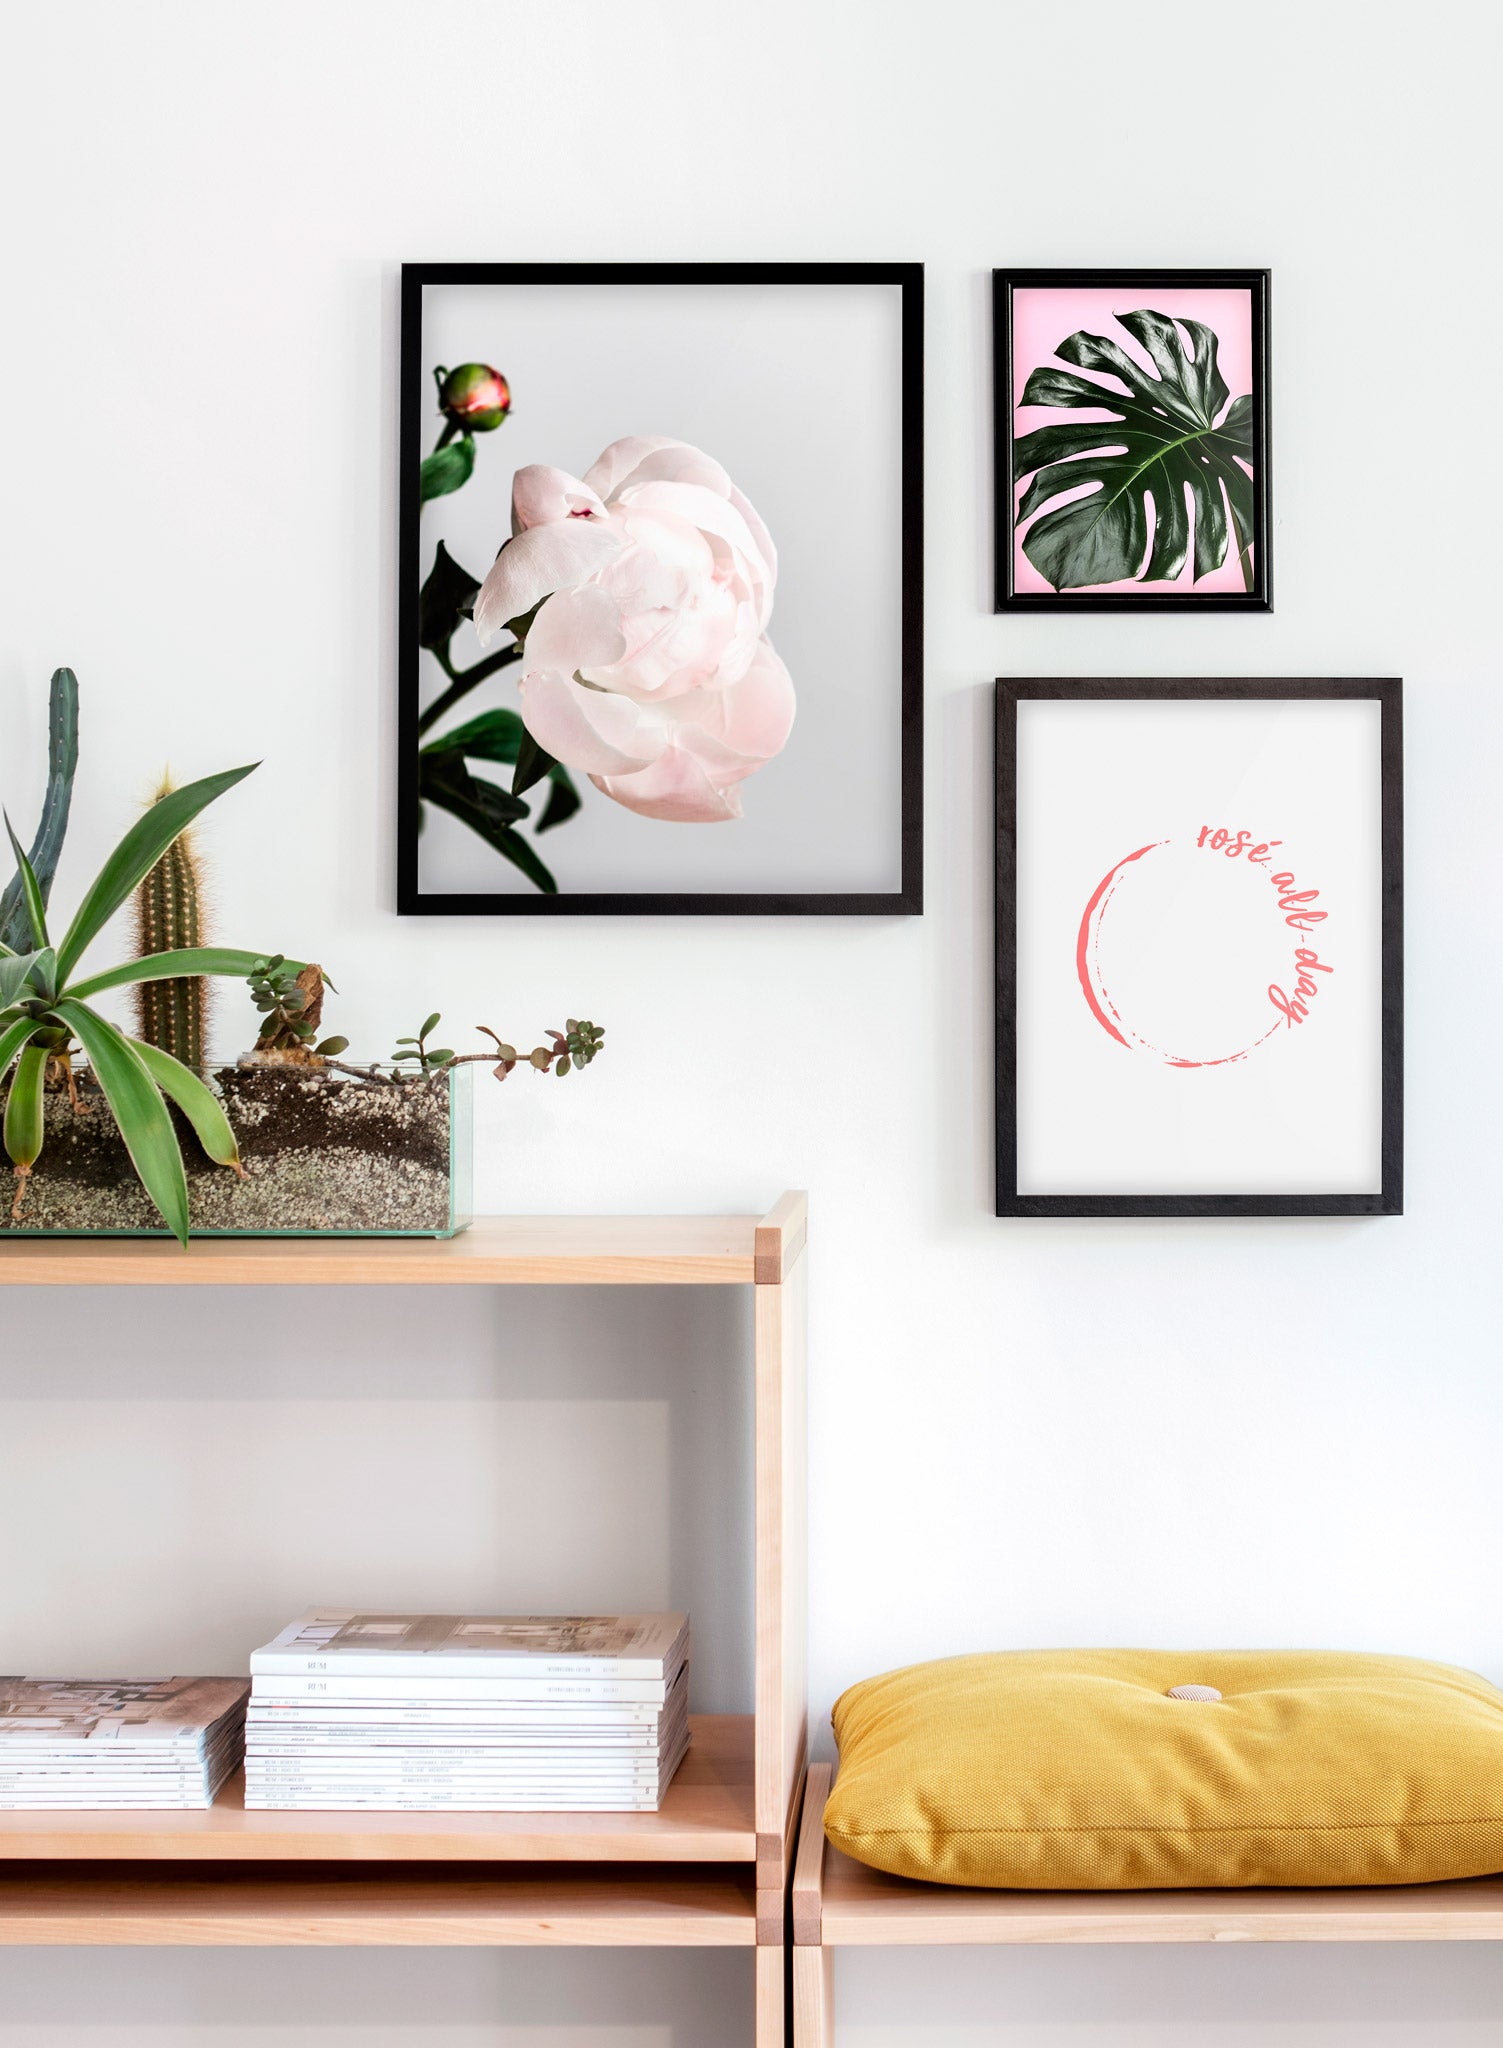 Modern minimalist poster by Opposite Wall with trendy pink hand-made illustration of Rosé All Day - Living room close-up on a yellow cushion